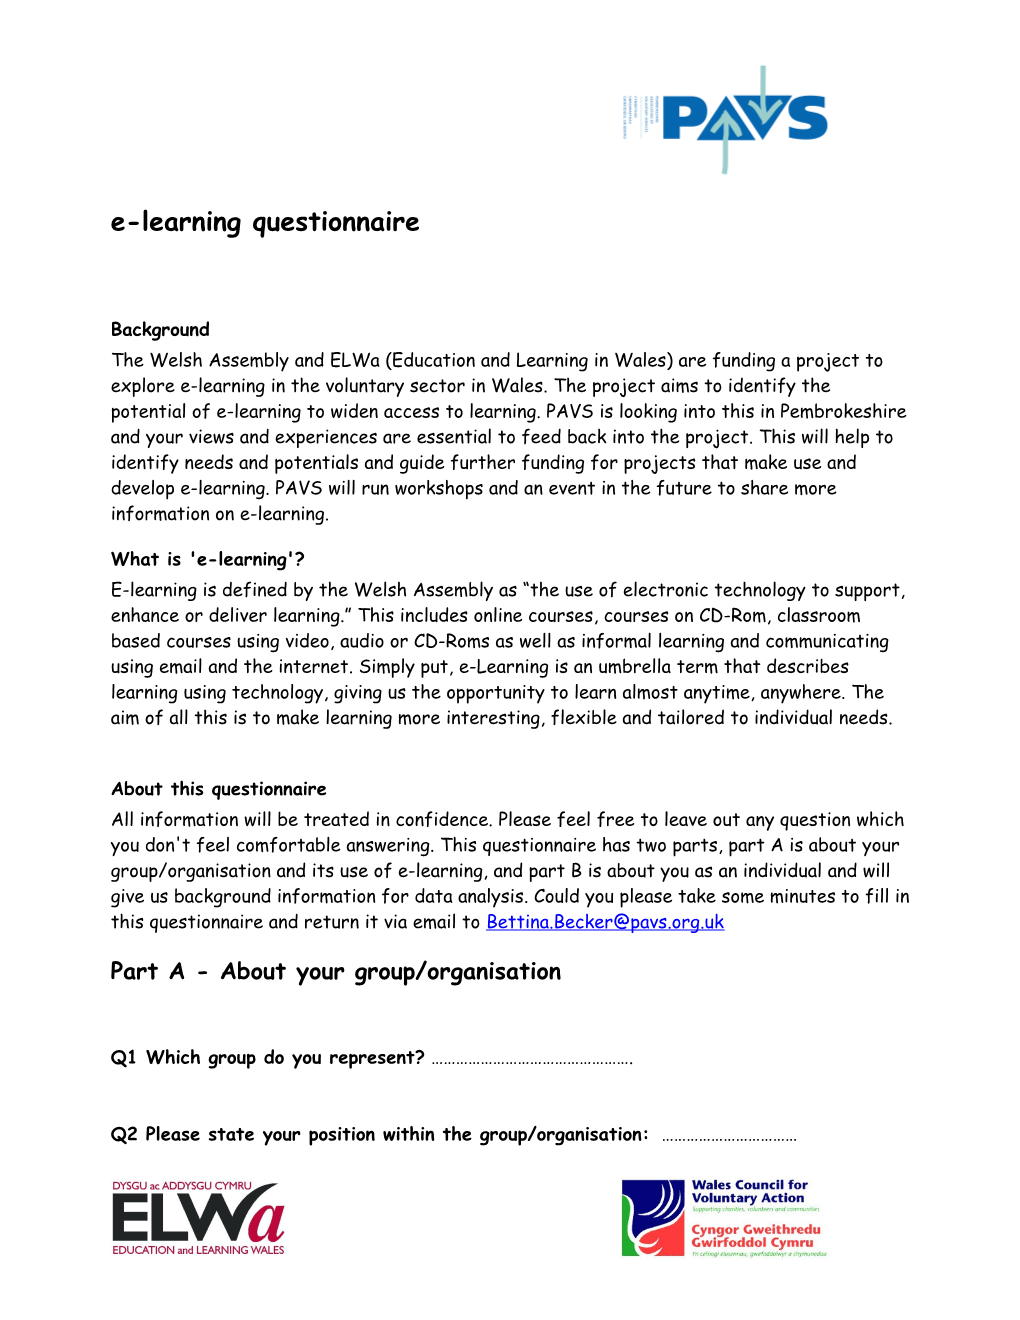 E-Learning Questionnaire